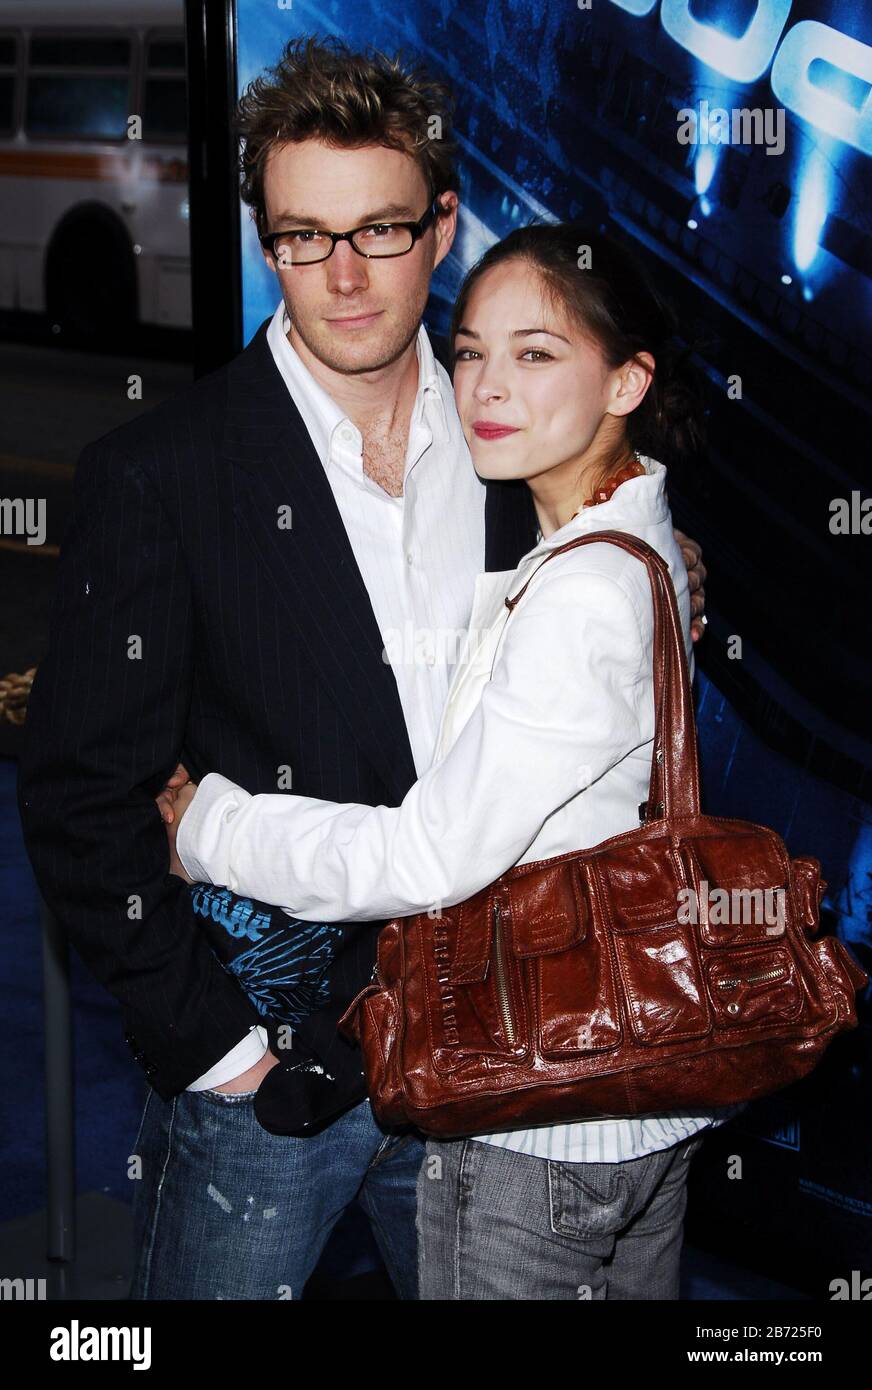 Kristin Kreuk and Boyfriend James at the Los Angeles Premiere of "Poseidon" held at the Grauman's Chinese Theater in Hollywood, CA. The event took place on Wednesday, May 10, 2006.  Photo by: SBM / PictureLux - All Rights Reserved - File Reference # 33984-3605SBMPLX Stock Photo